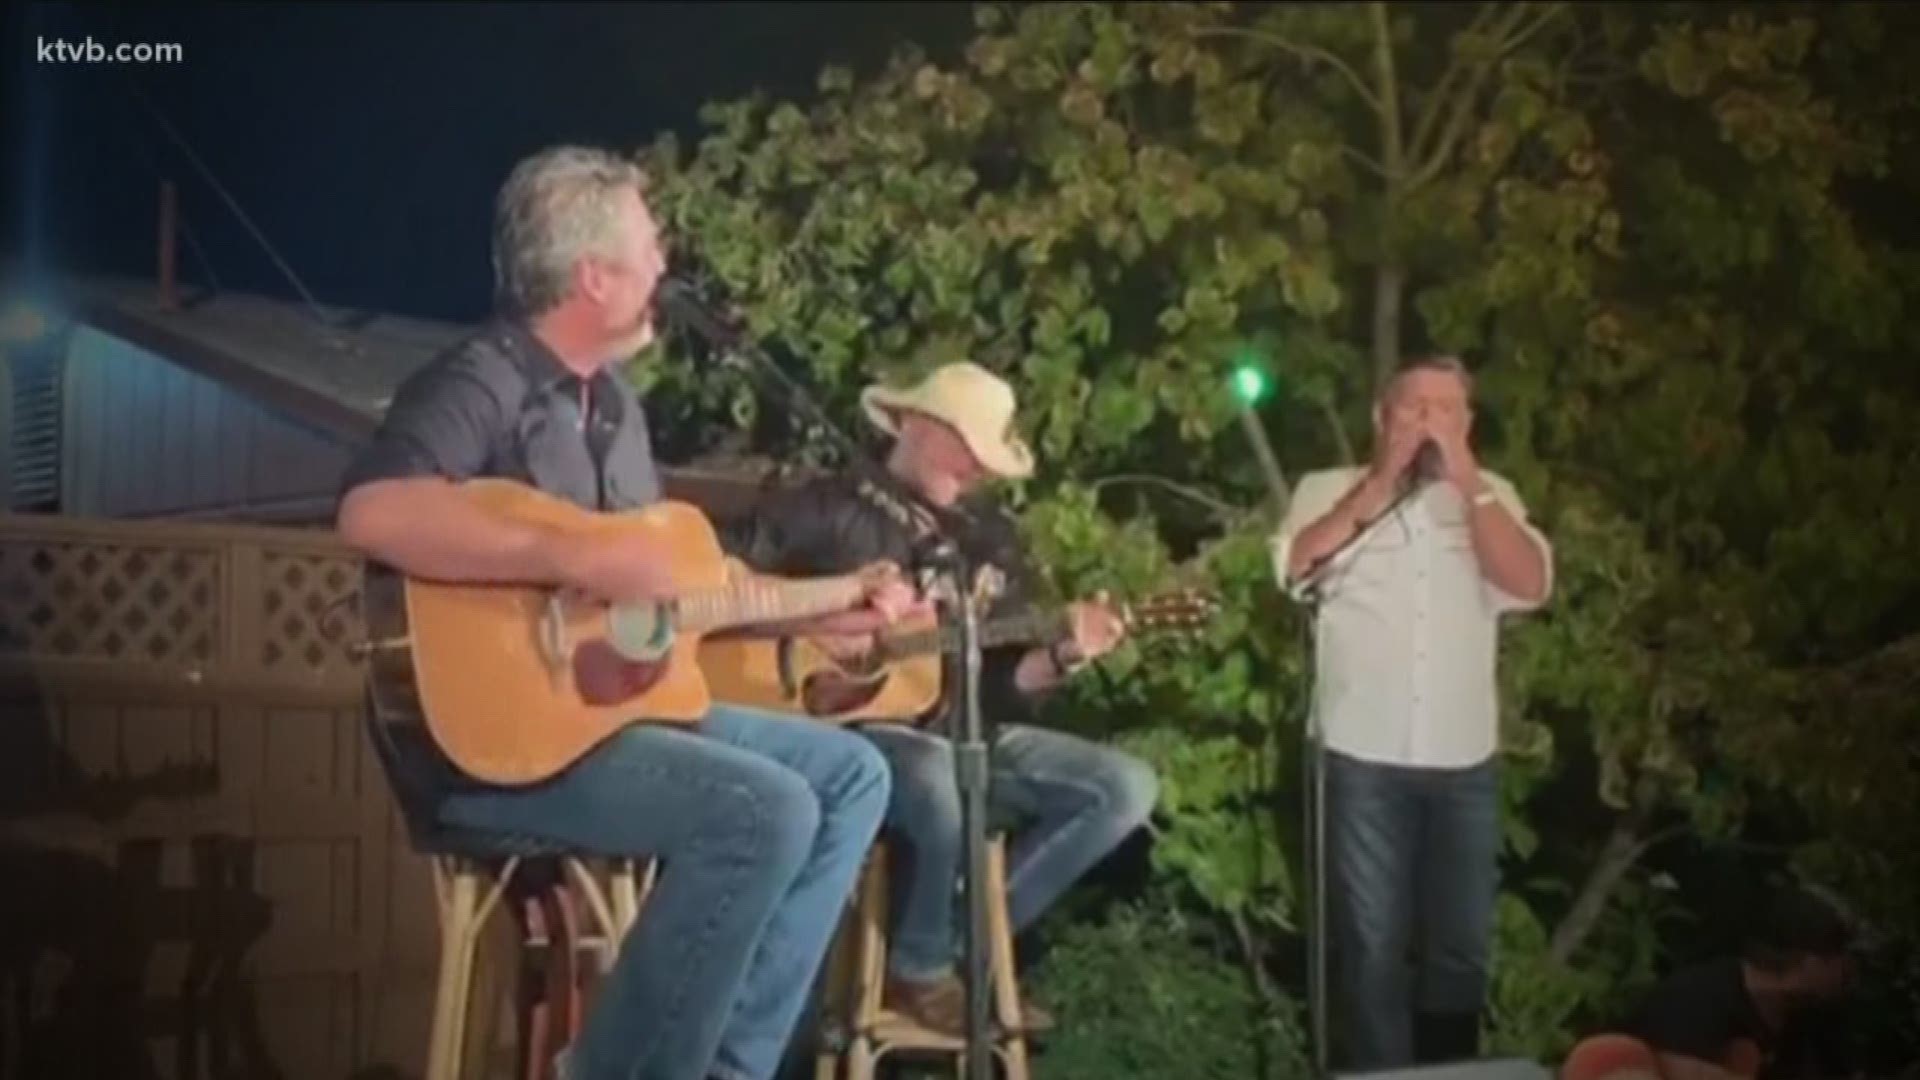 Mark joined Blake on stage and played his harmonica during a rendition of "Ol' Red."